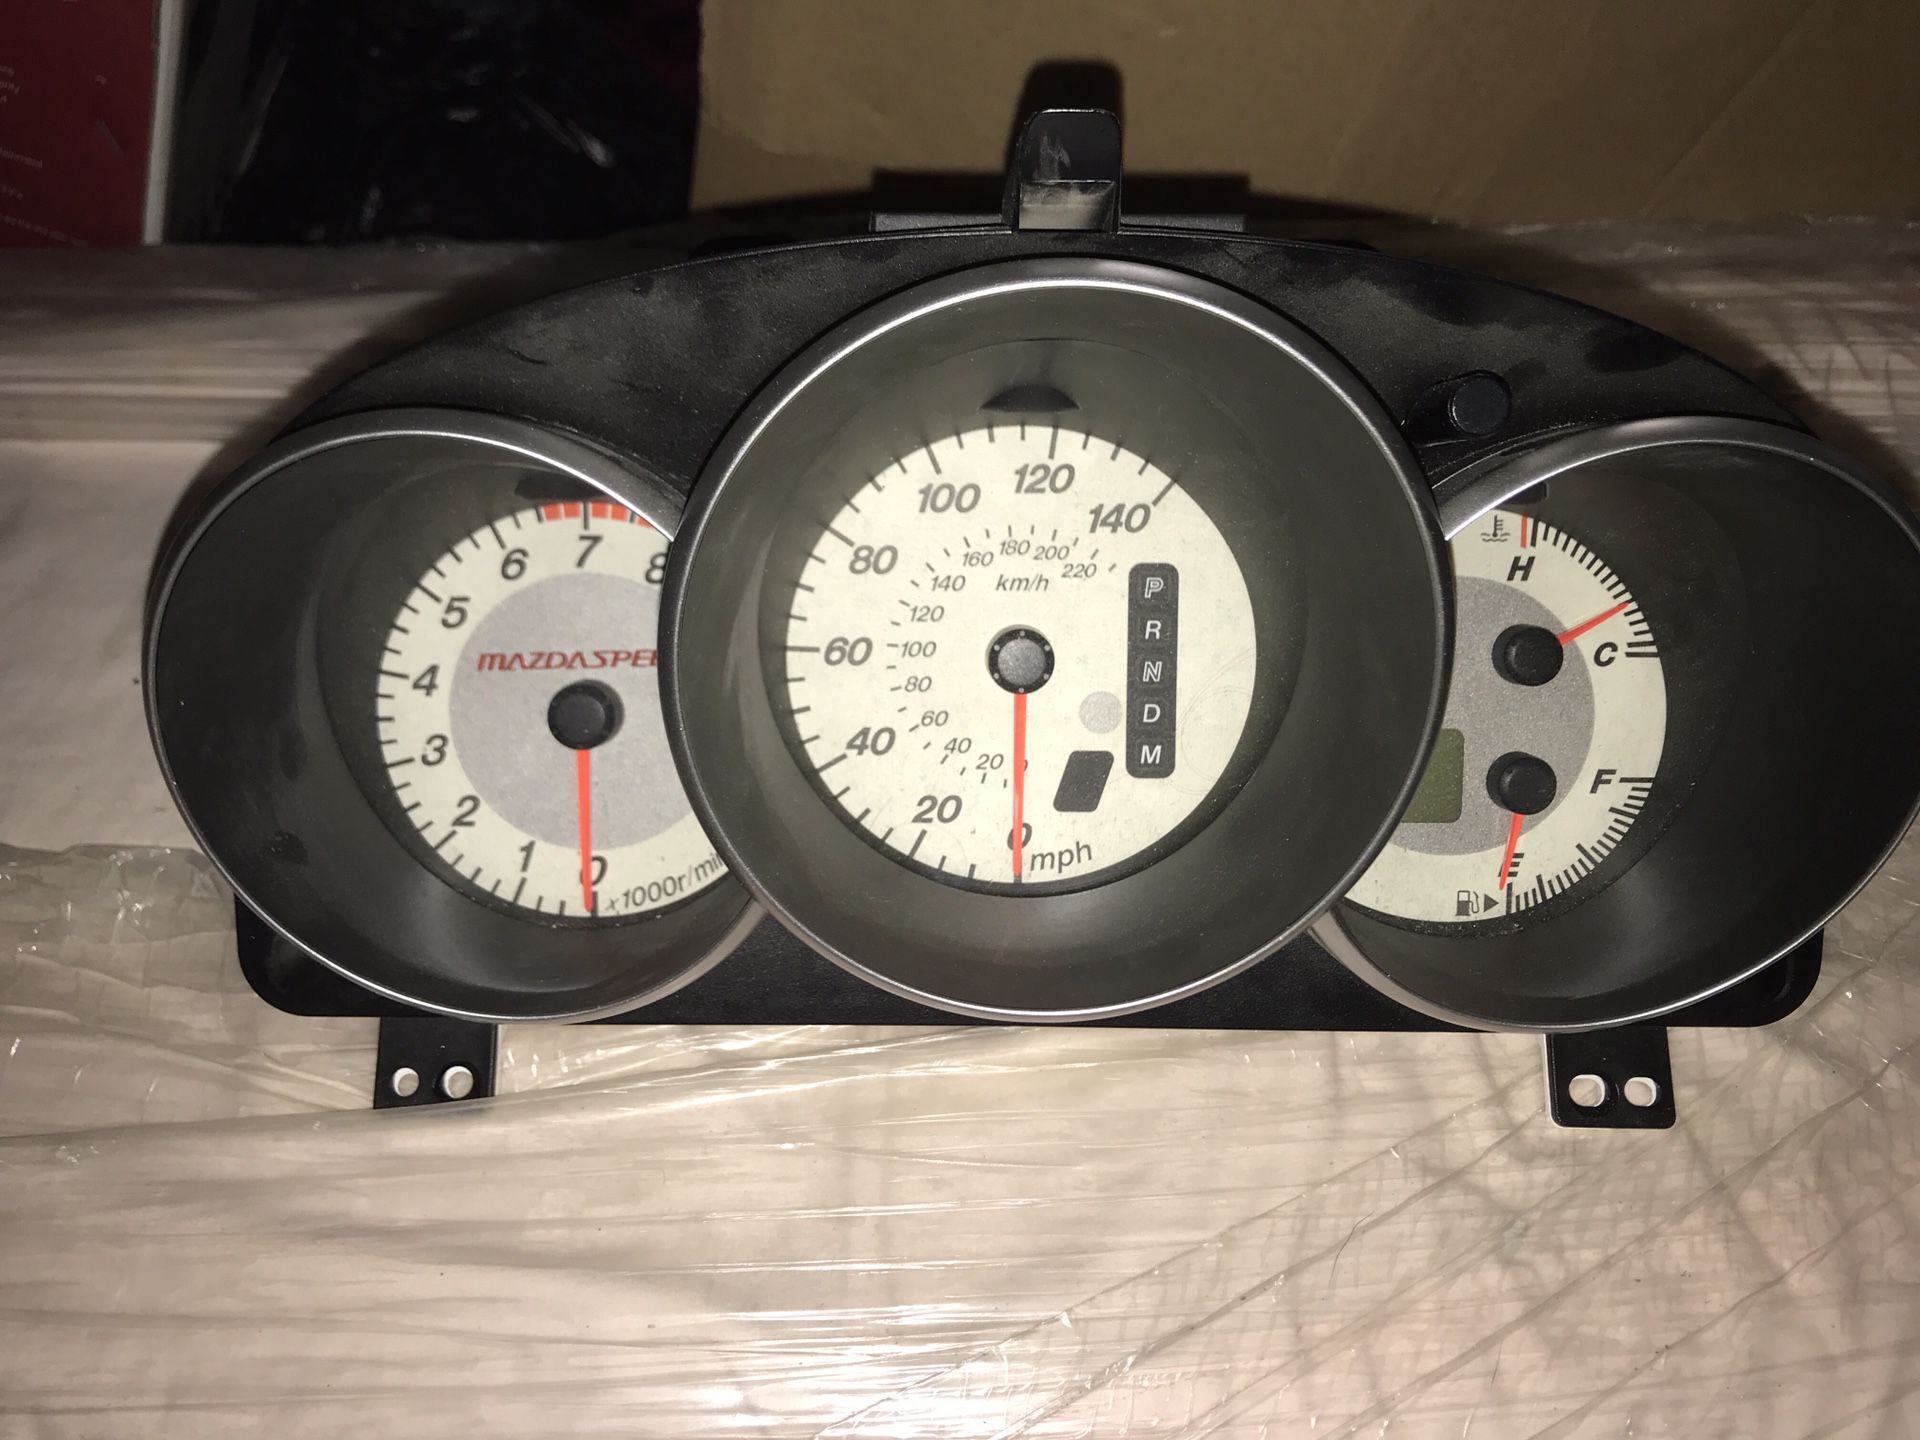 2003-2009 Mazda 3 sedan and hatchback Rare JDM automatic cluster with Mazdaspeed name